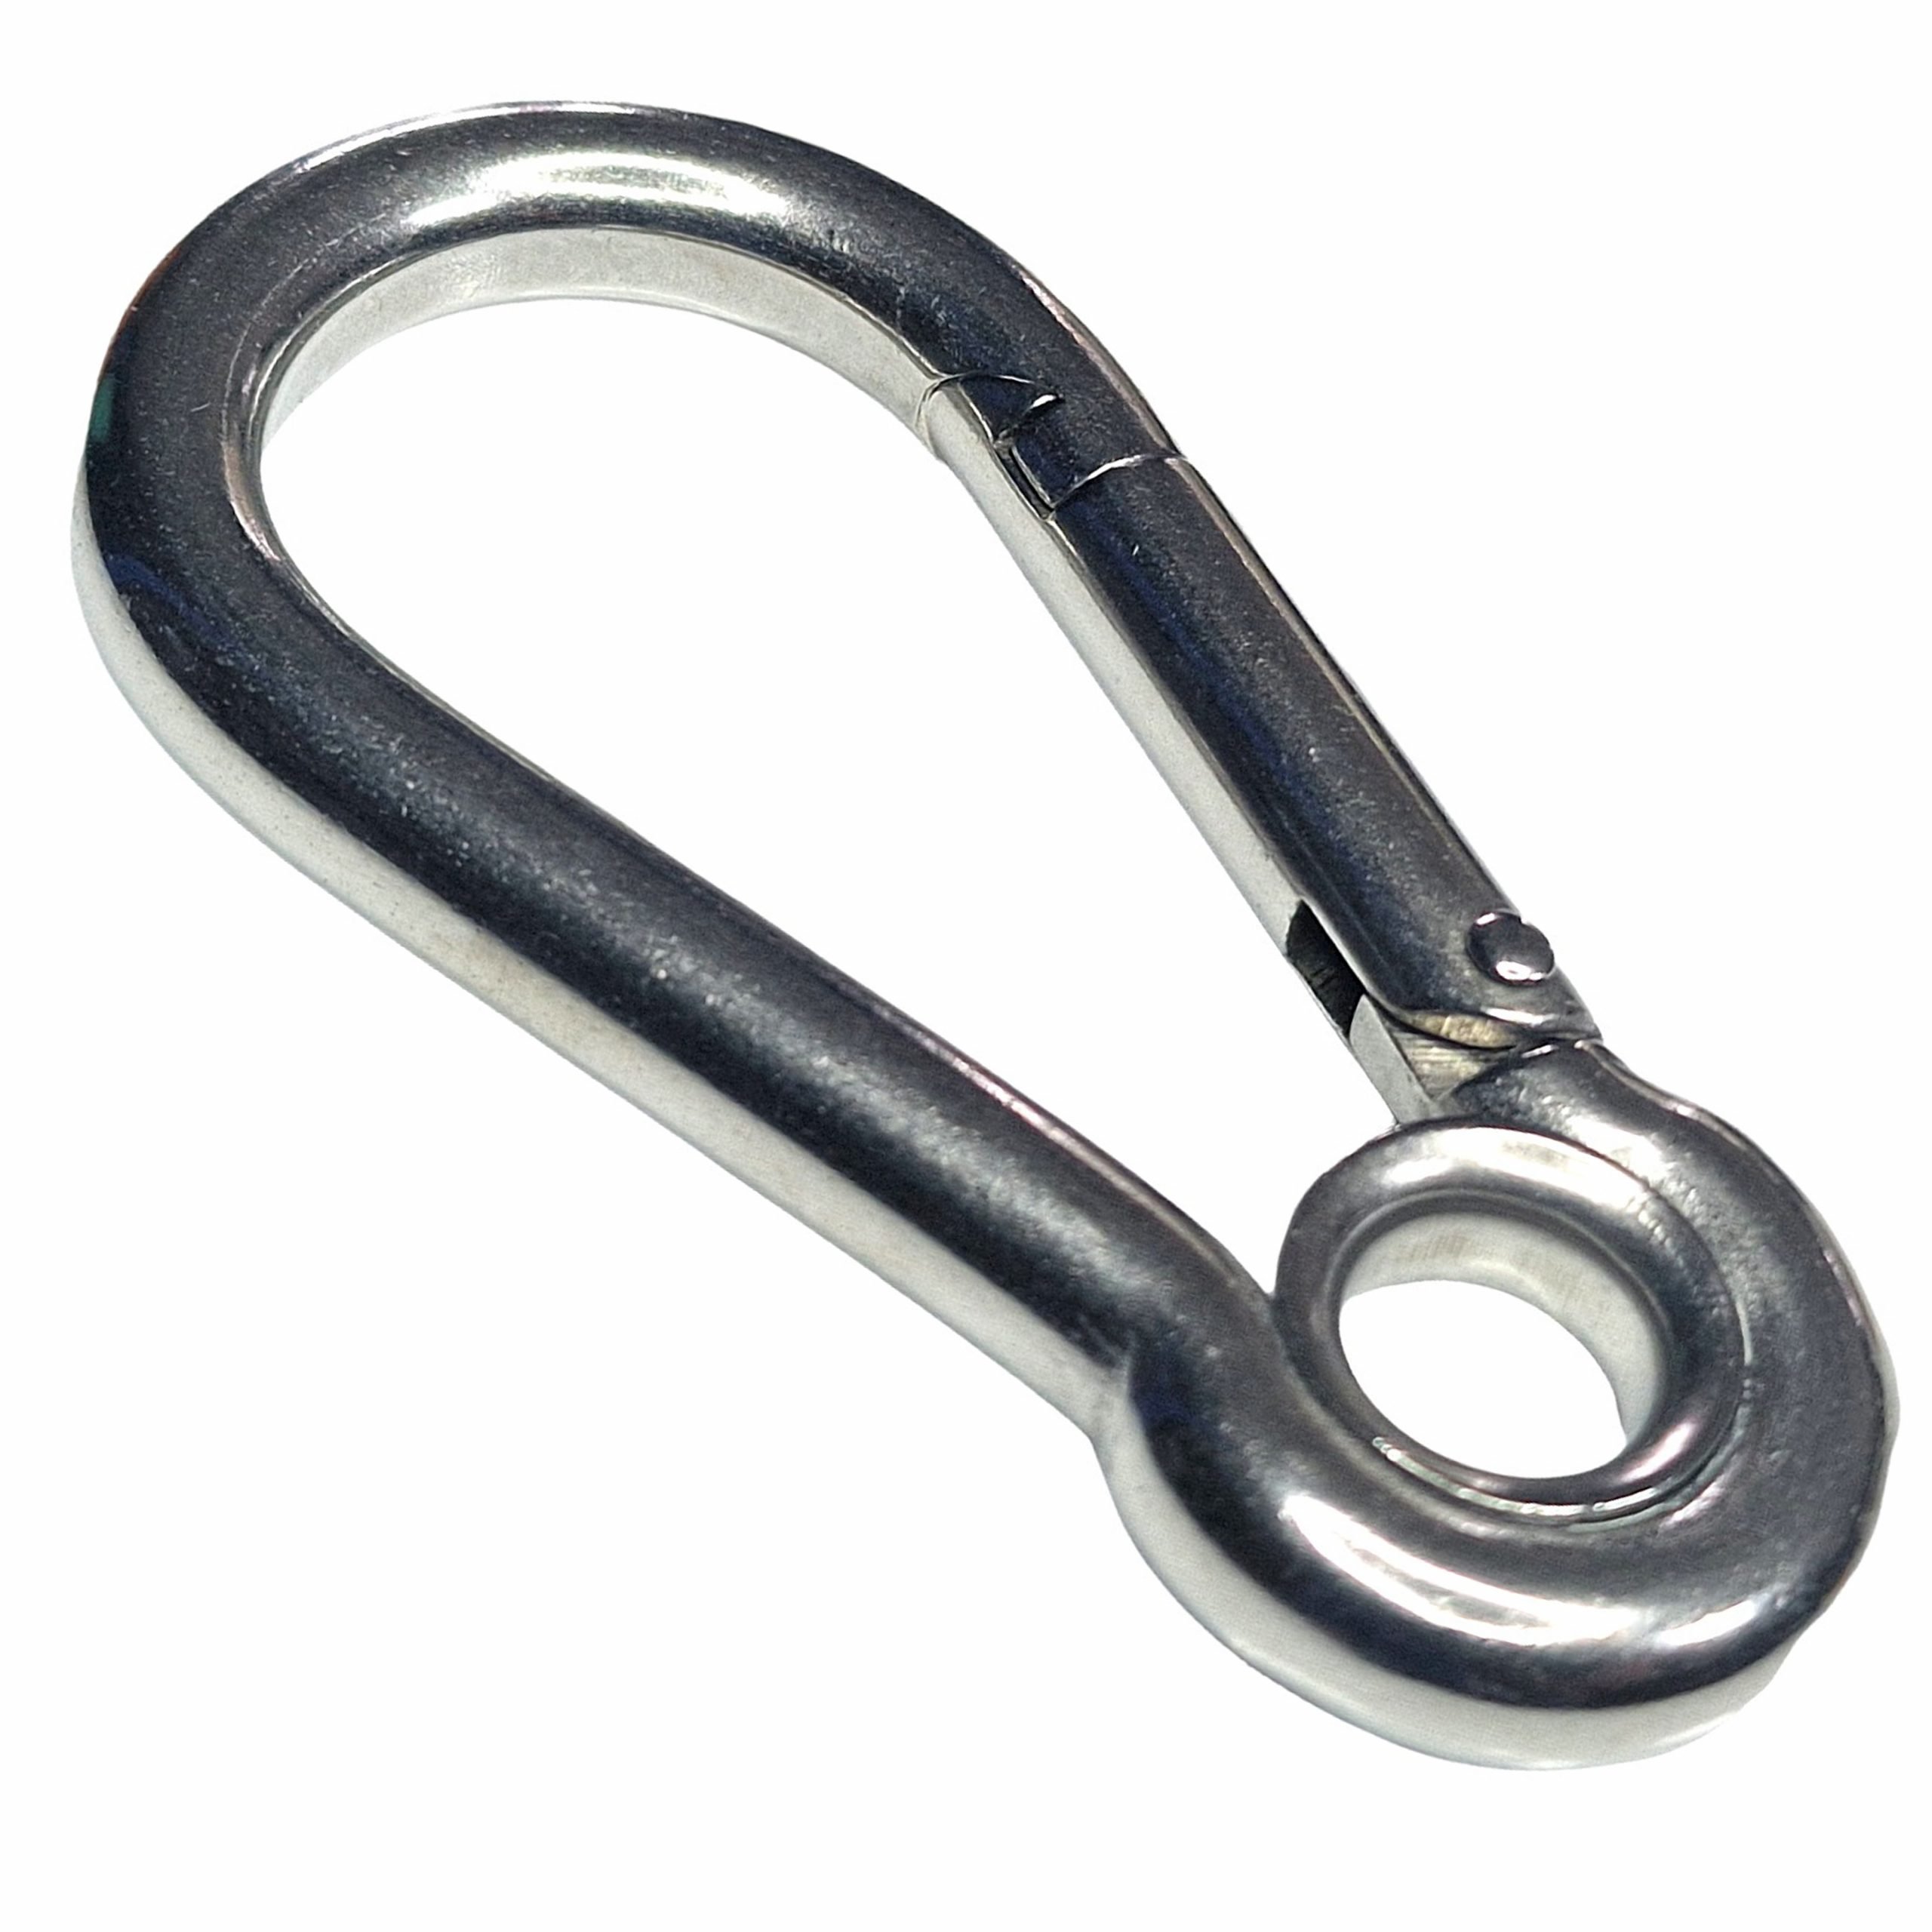 Stainless Steel 316 Spring Hook with Screw Nut and Eyelet Carabiner 1/4  (6mm) Marine Grade - US Stainless